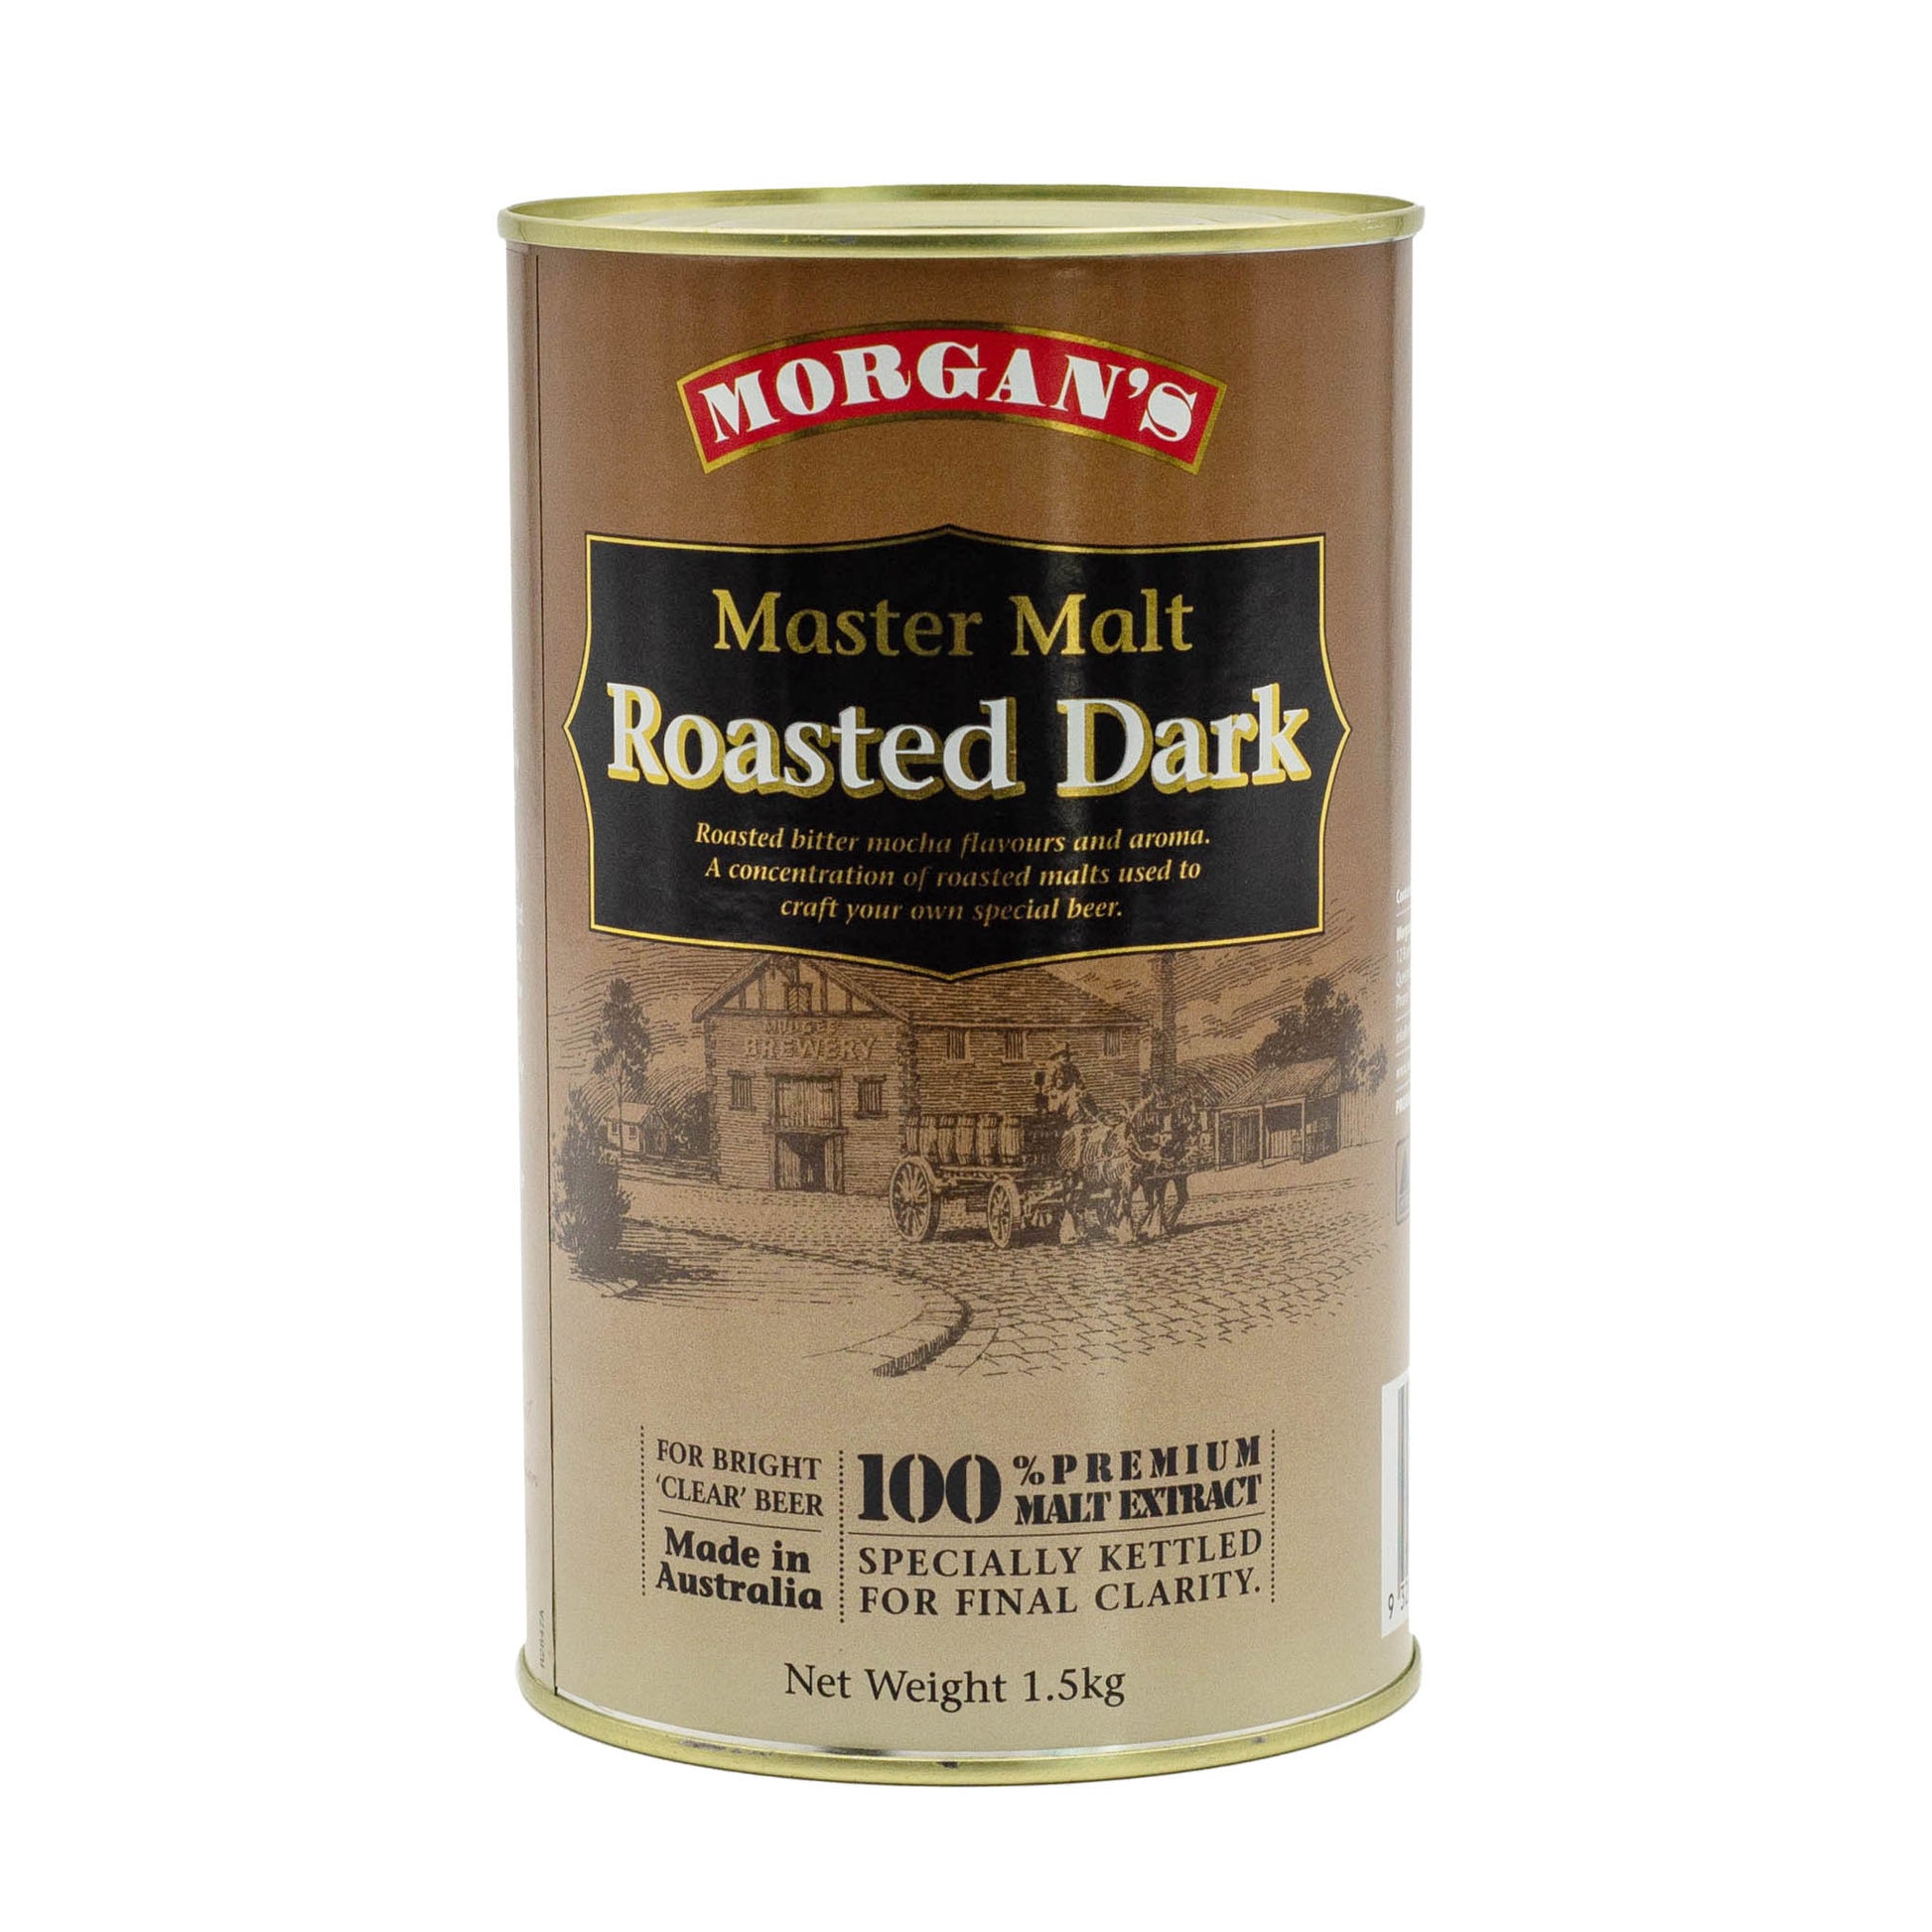 Morgans Master Malt Roasted dark brew tin is perfect for Roasted Bitter Mocha Flavours and Aroma